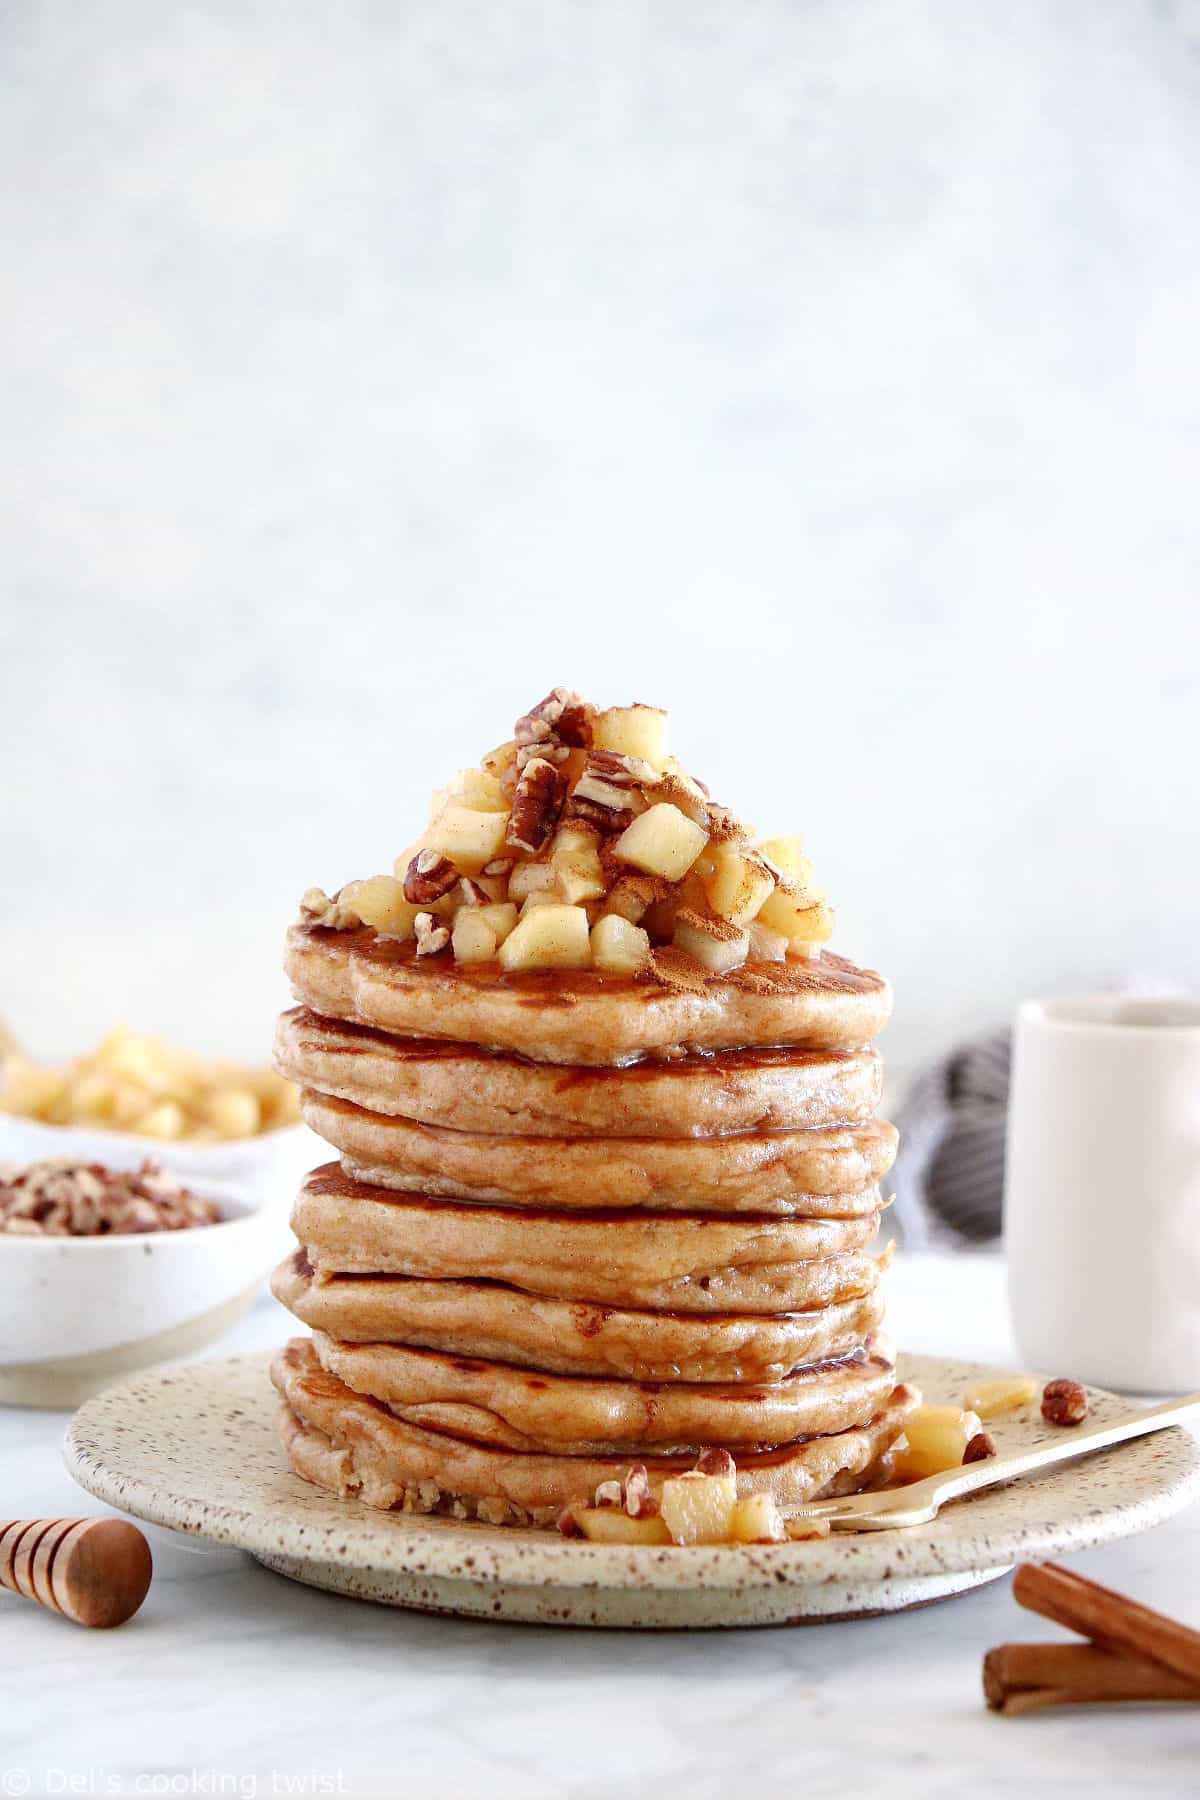 Healthy apple pancakes are prepared with shredded apples and a mix of whole wheat flour and almond flour to make them more nutritious.